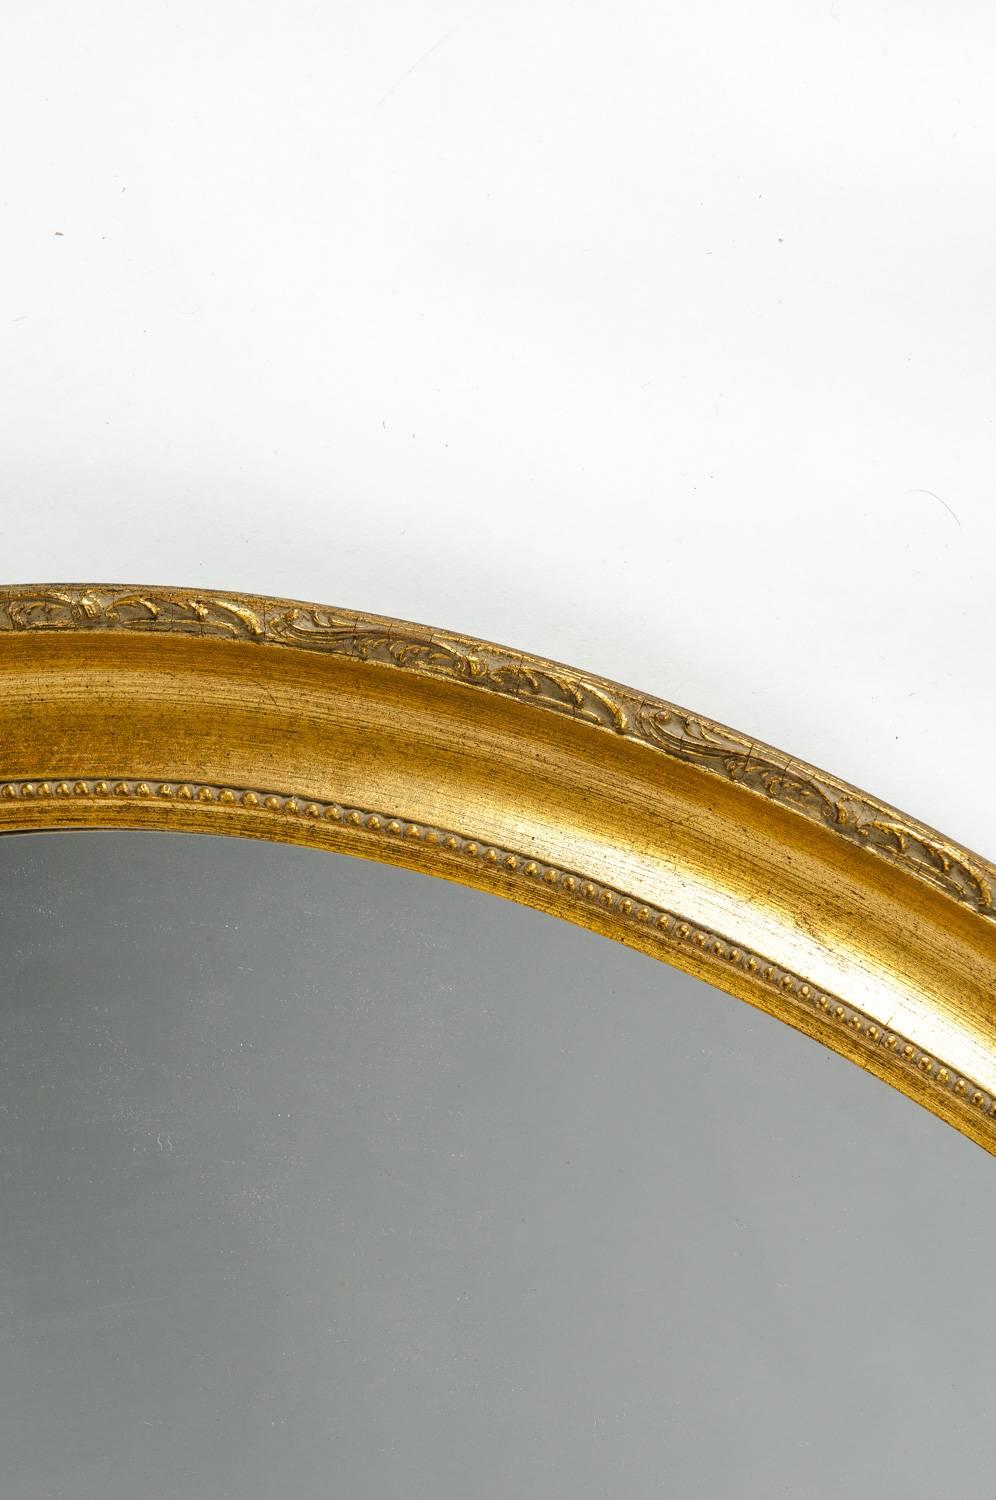 Mid-20th century gilded wood frame oval shape hanging mantel wall mirror. The oval mirror measure about 44 inches Length X 34 inches Width X 2.7 inches dept of the frame .